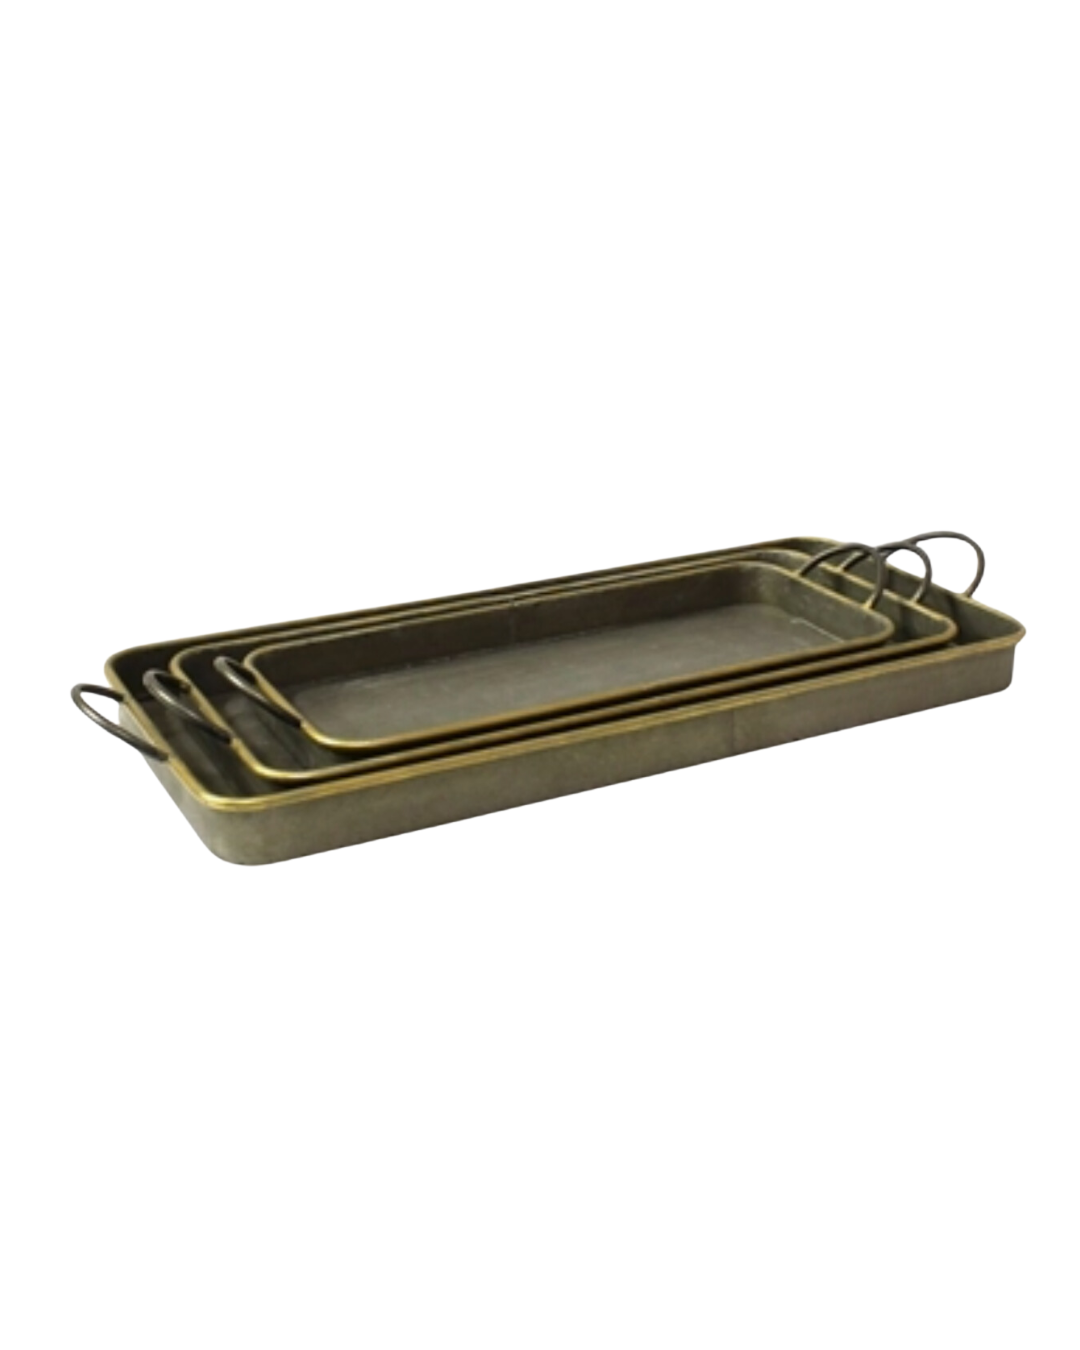 Three nested rectangular metal Archer Galvanized Trays with handles, displayed in an Arizona-style light beige background by HomArt.